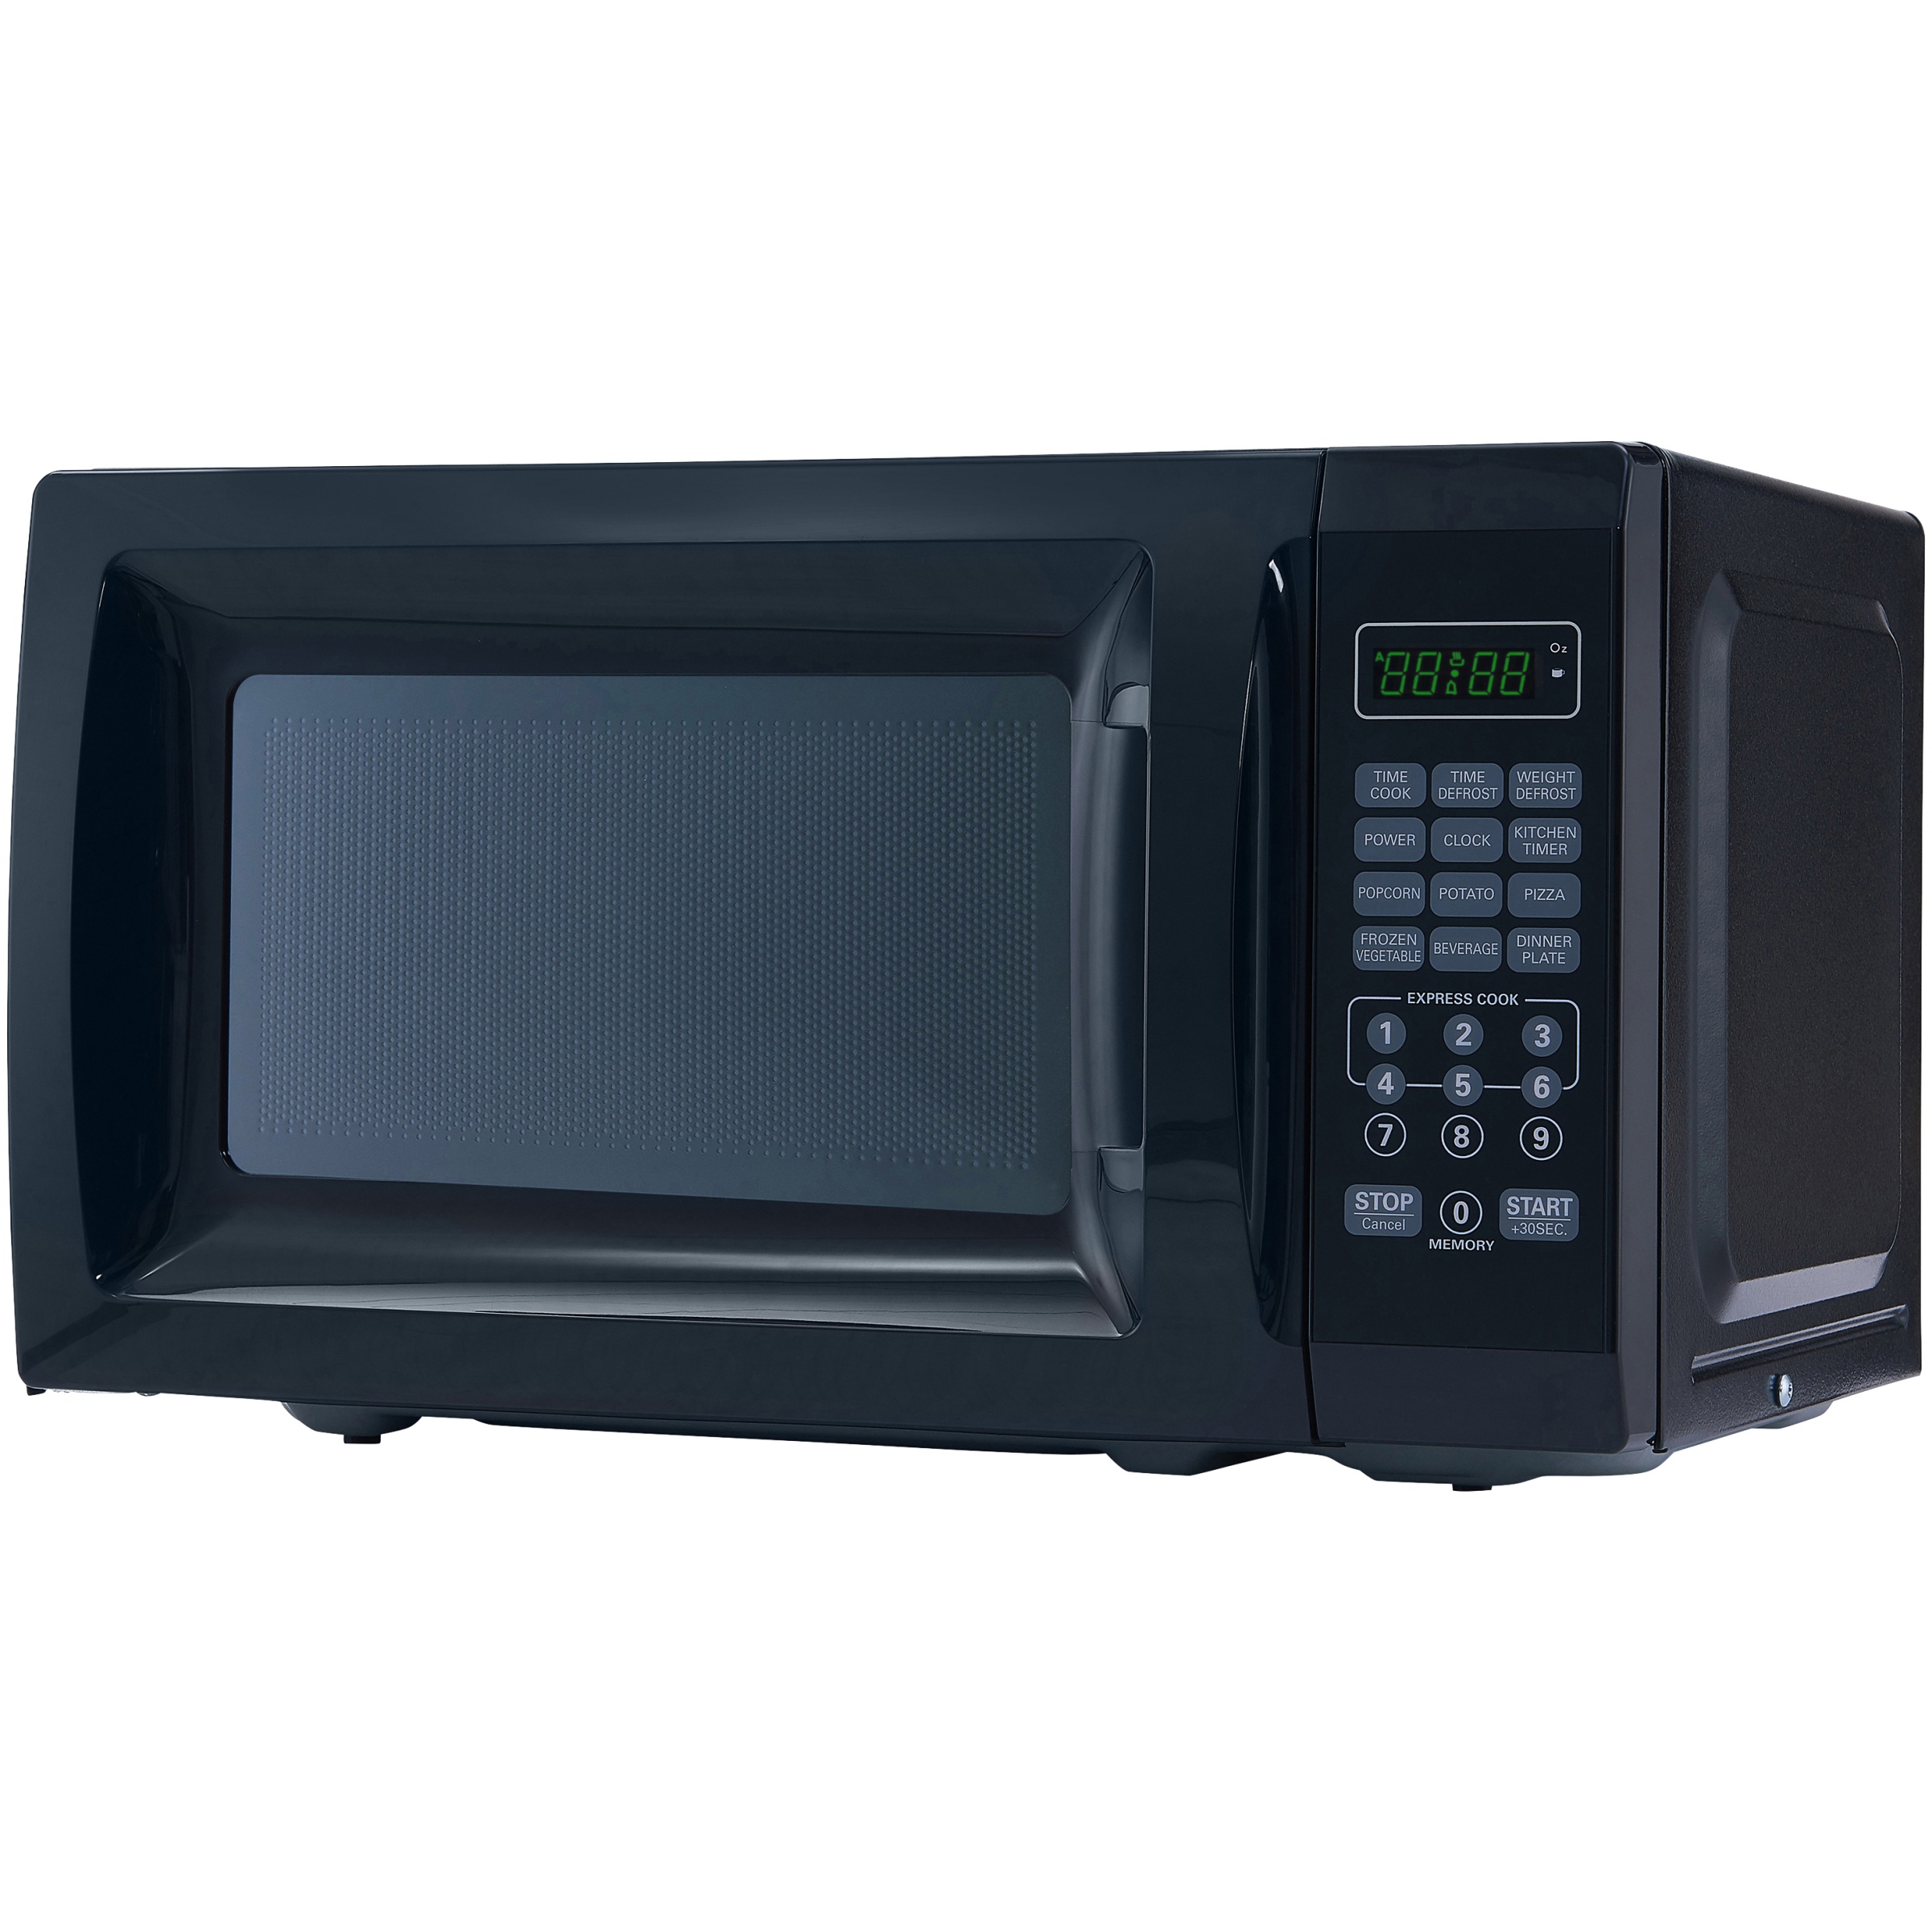 Mainstays 0.7 Cu. Ft. 700W Black Microwave Oven - image 1 of 7